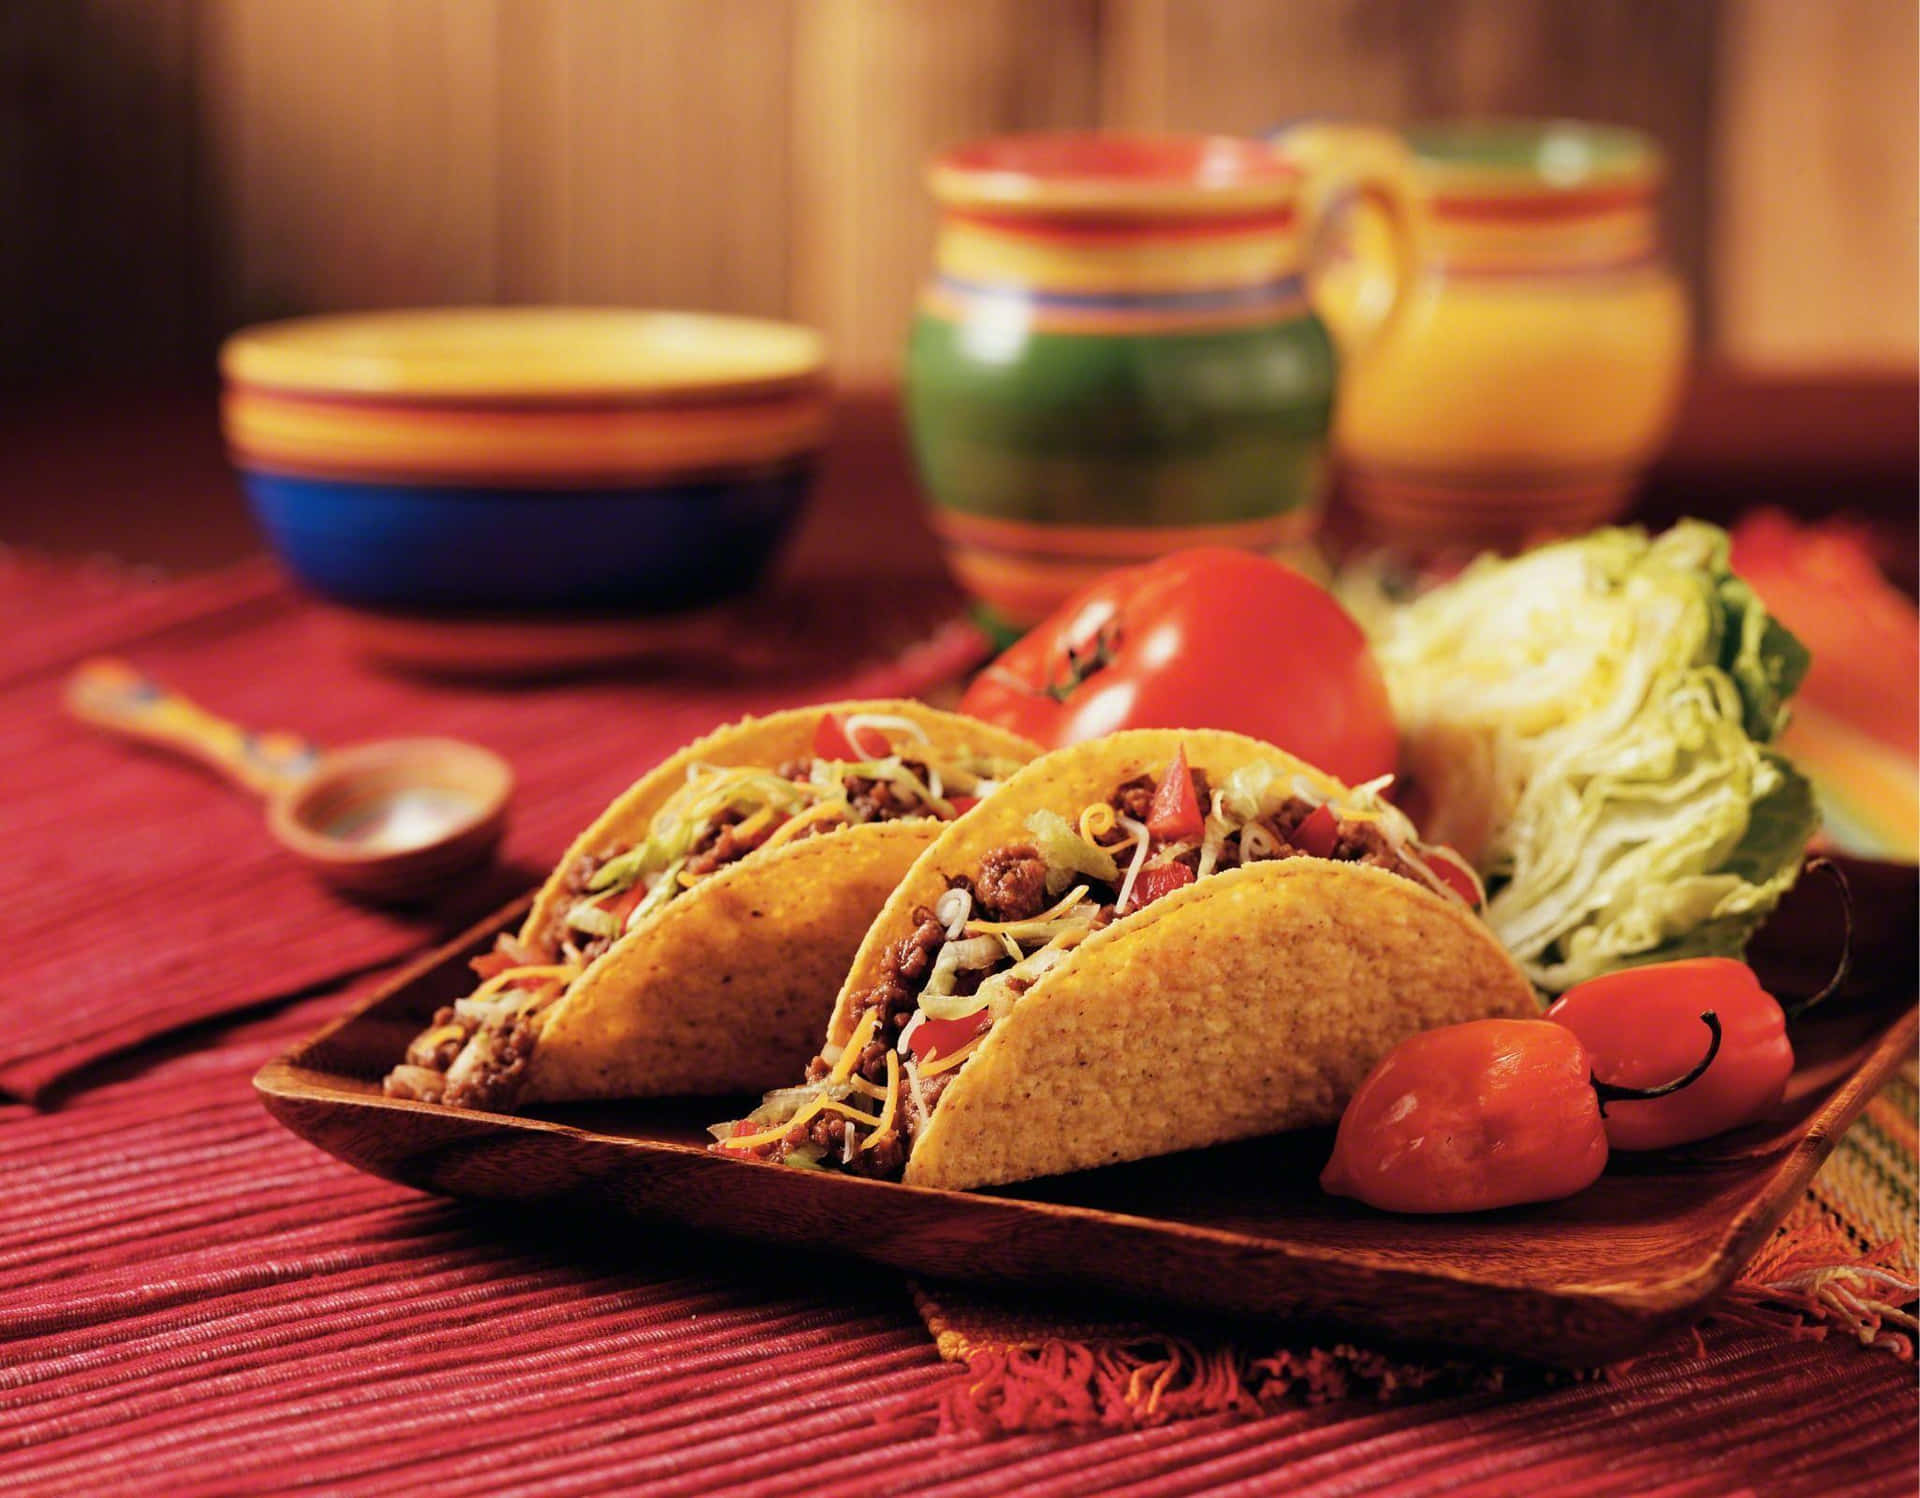 A Plate Of Tacos With Vegetables And Sauce